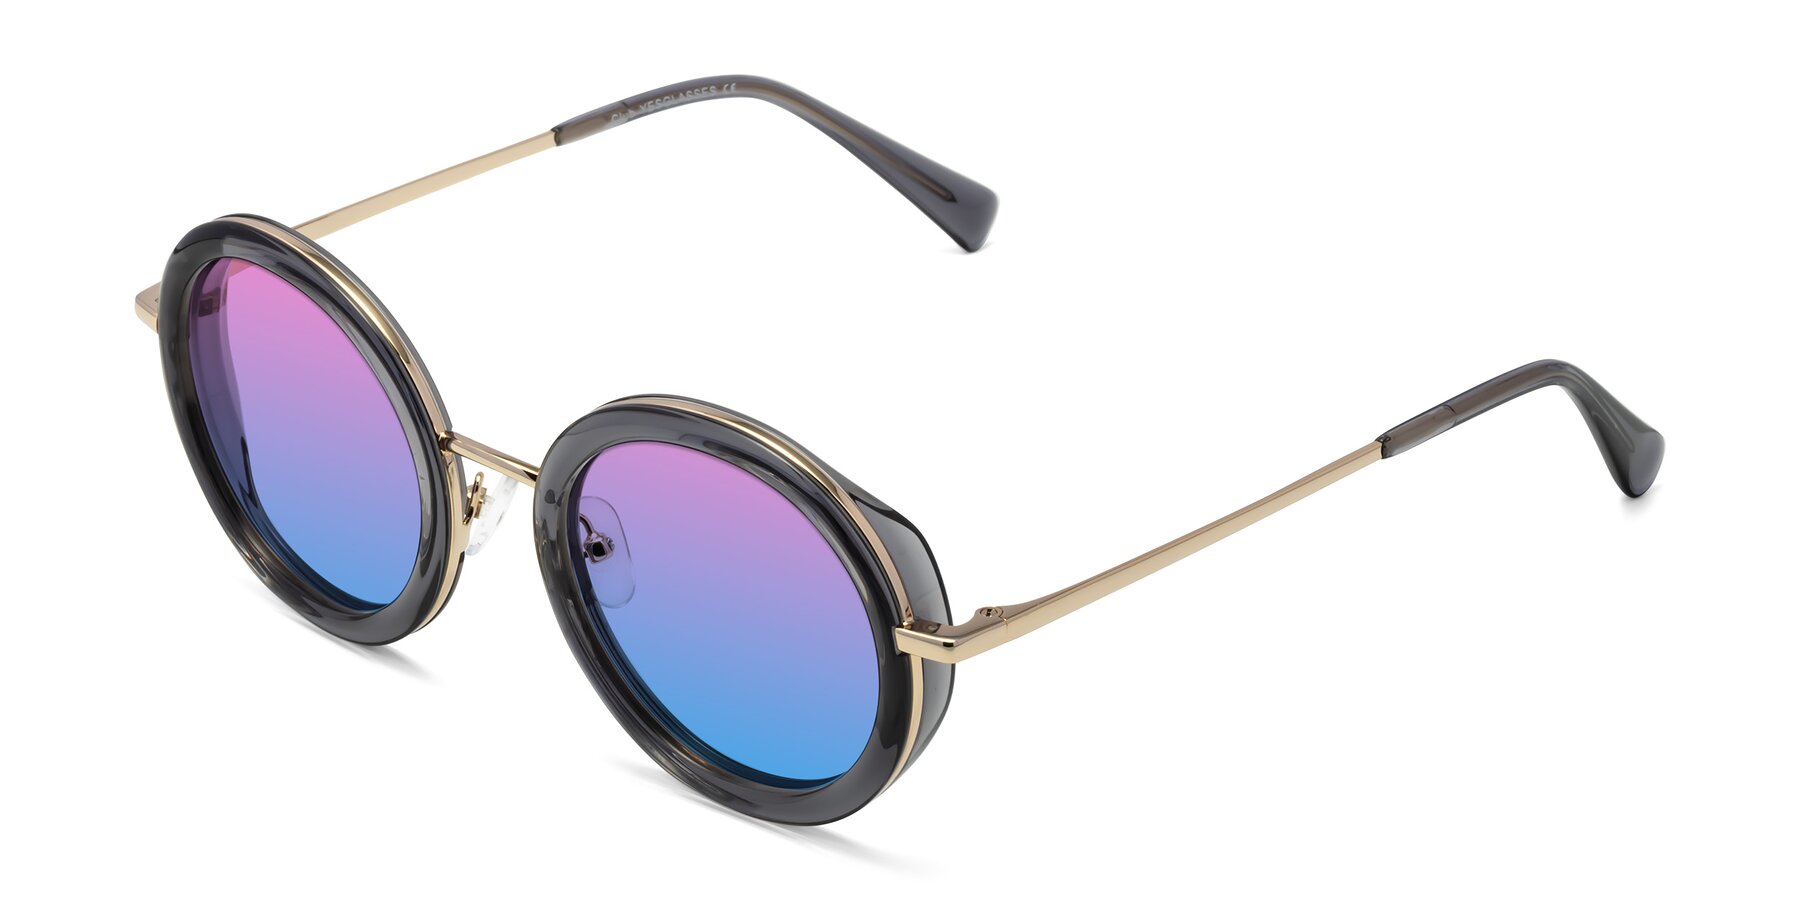 Angle of Club in Gray-Gold with Pink / Blue Gradient Lenses